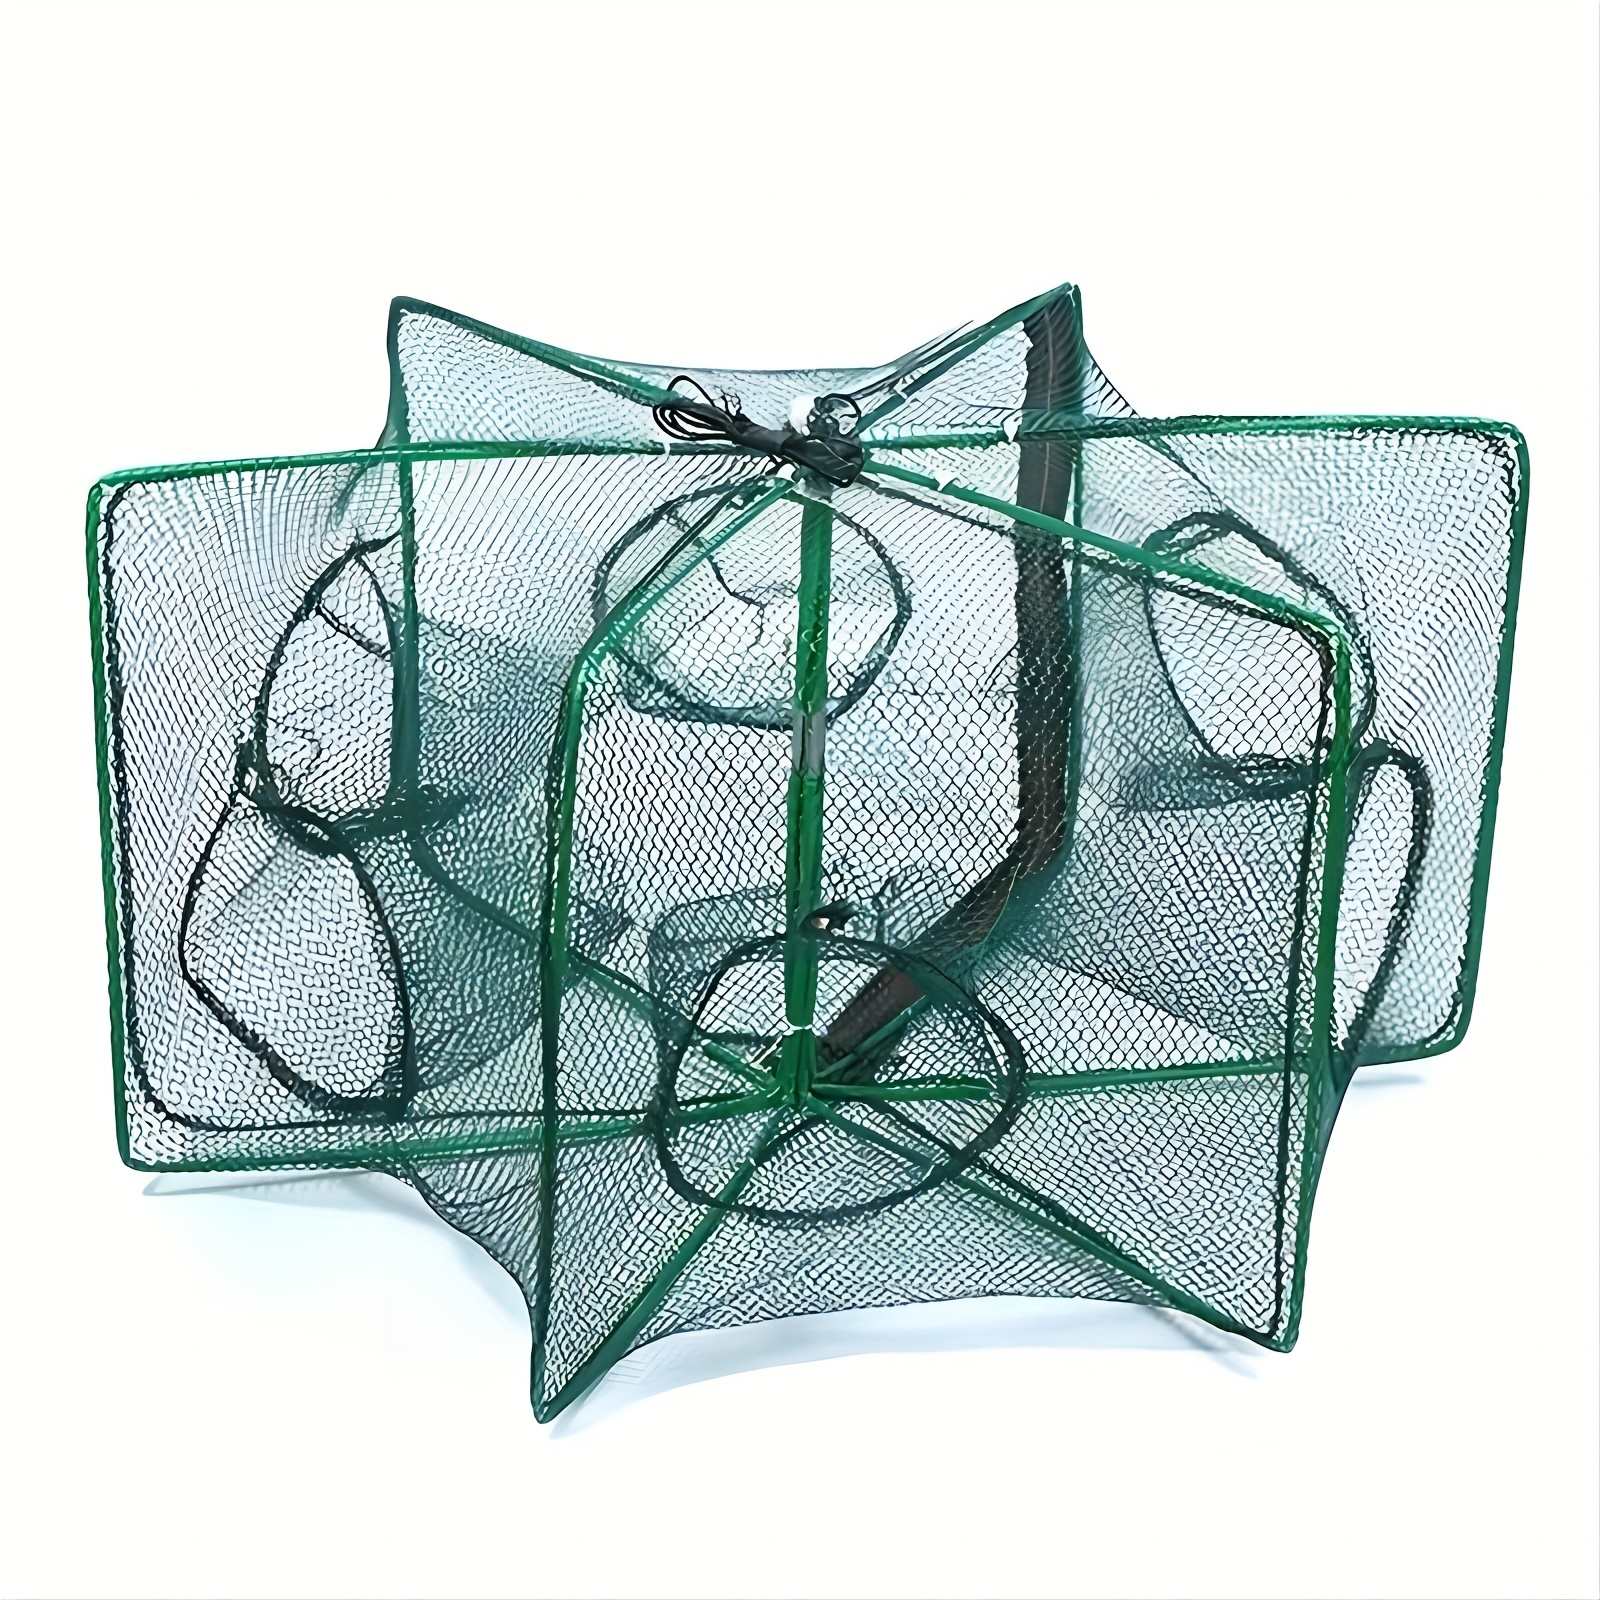 Foldable Hexagon Fishing Bait Trap with 6 Holes - Catch More Fish, Minnows,  Crabs, Crawdads, and Shrimp with Ease - Collapsible and Convenient Fishing